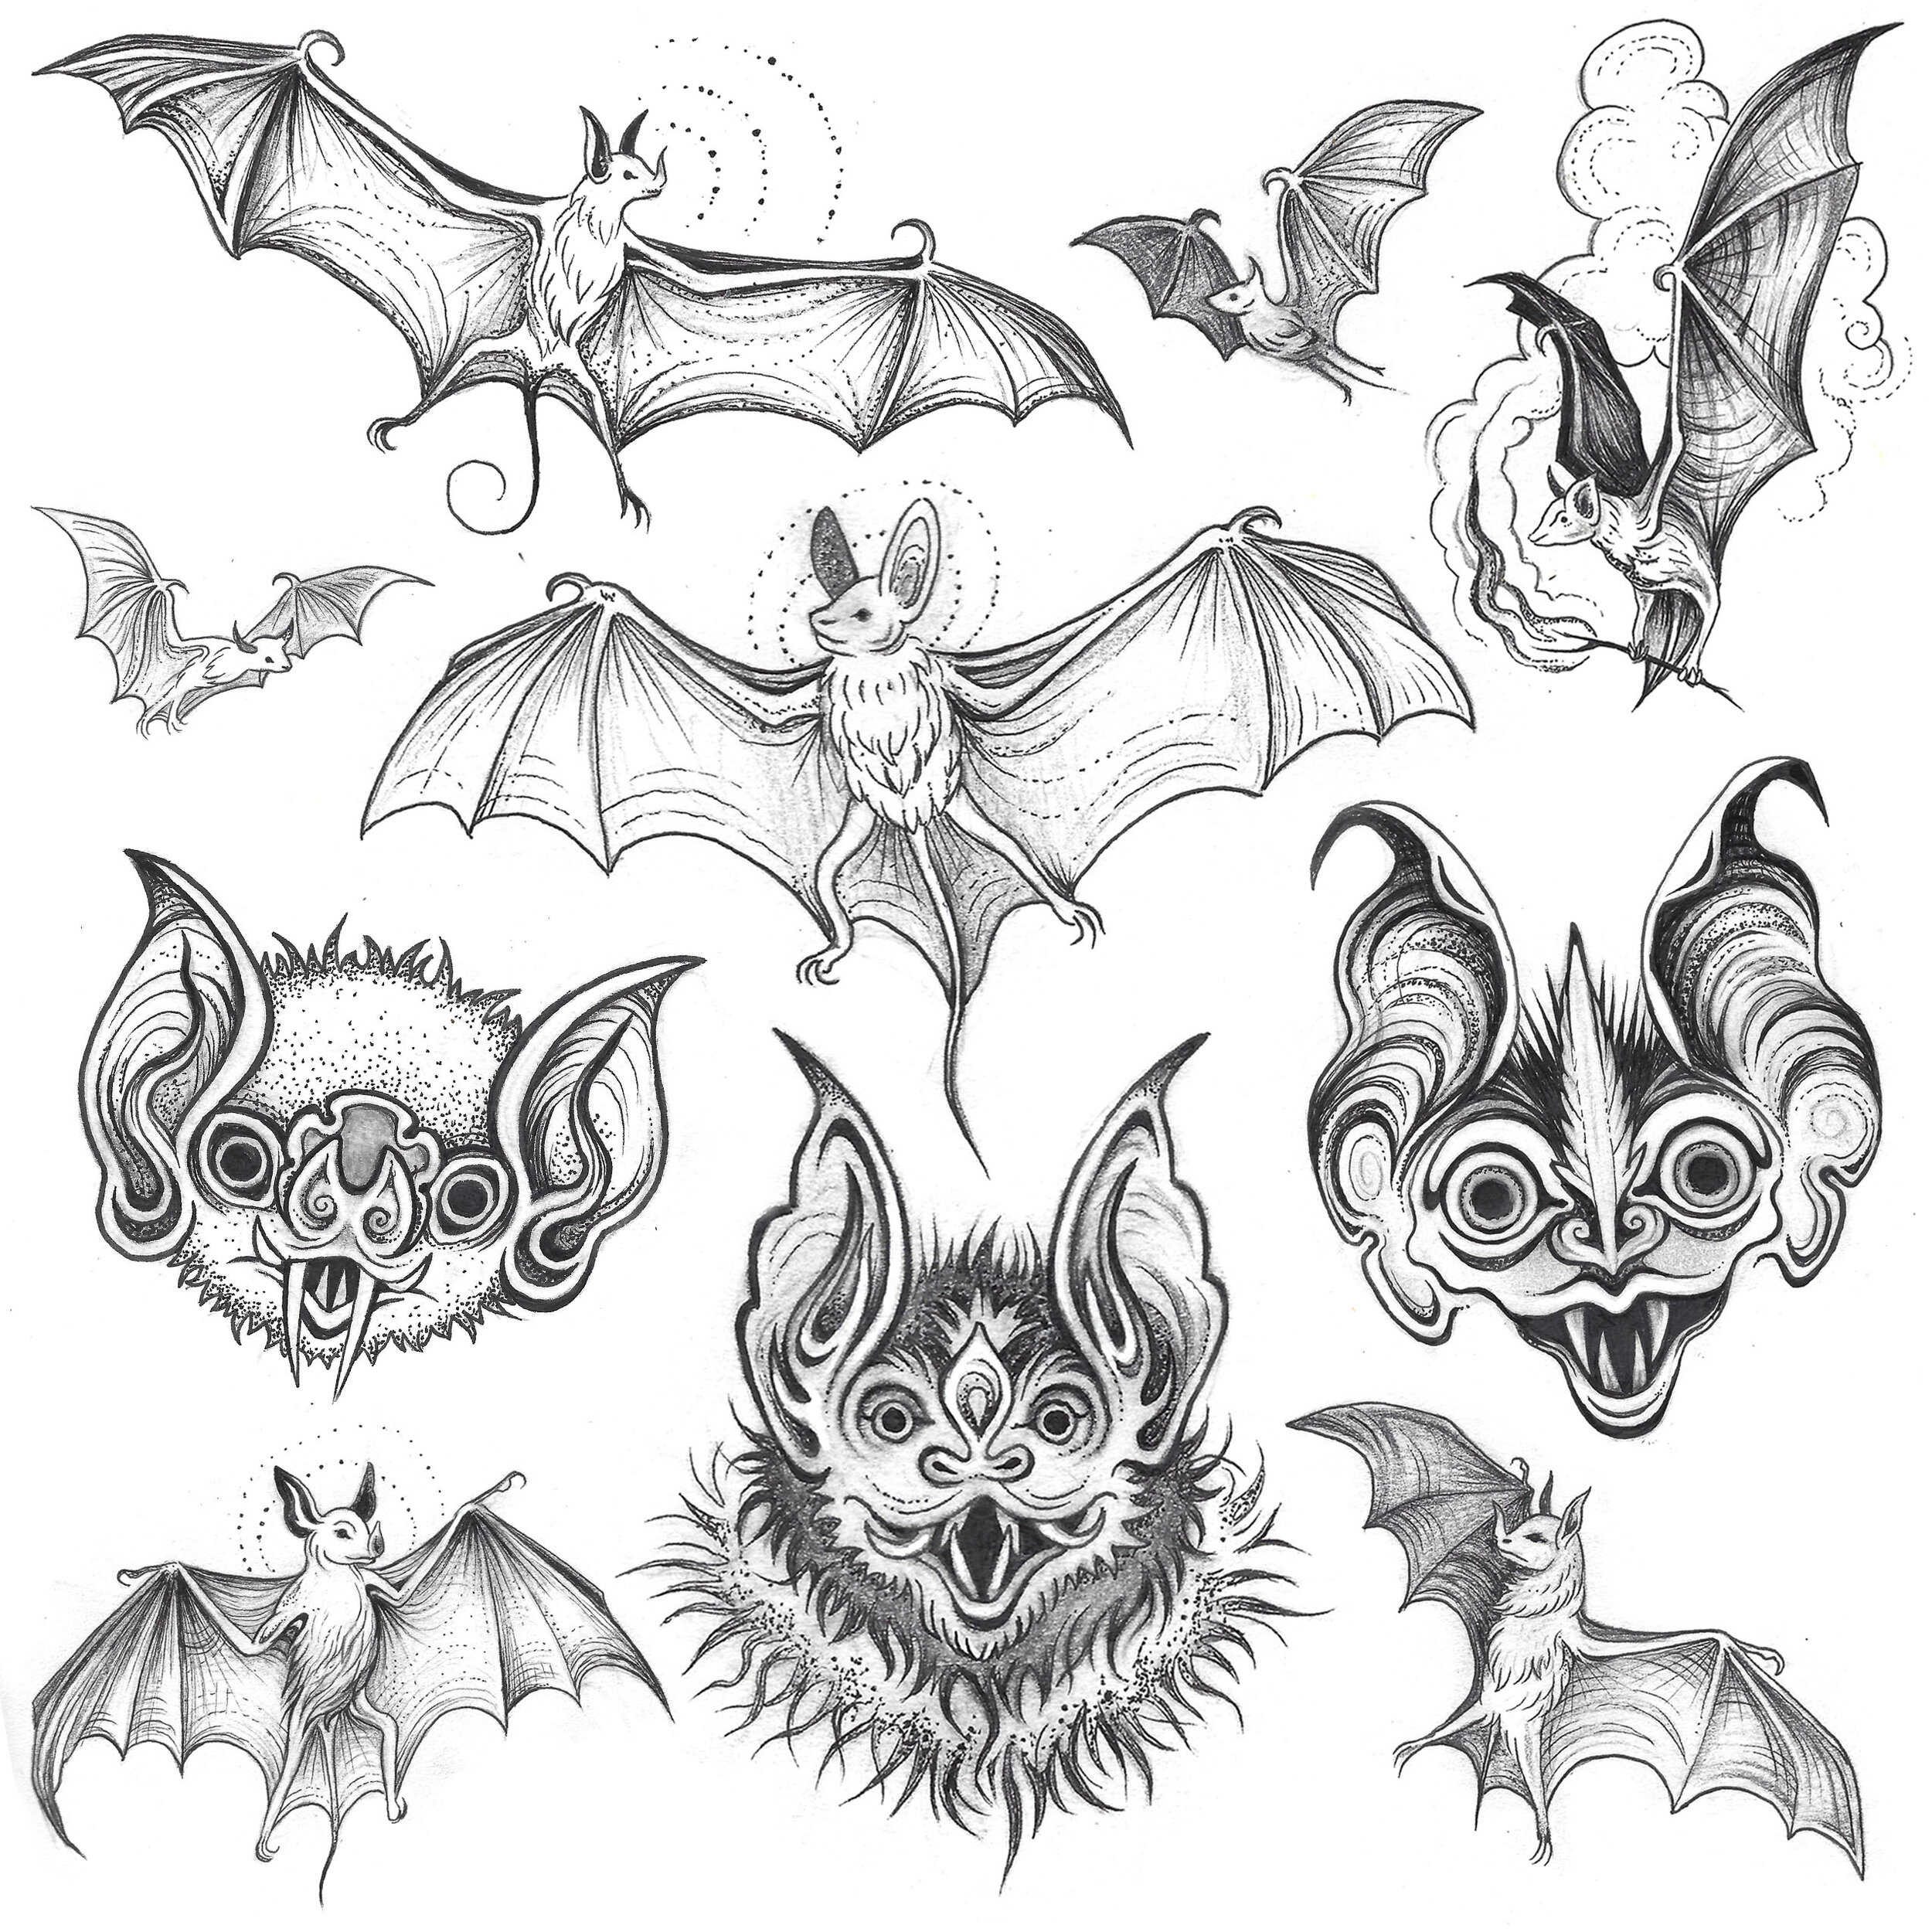 Heres a bat tattoo I did straight outta my flash DISCLAIMER All designs  are original artworks done by me Instagram ksvink  rAnimalArt